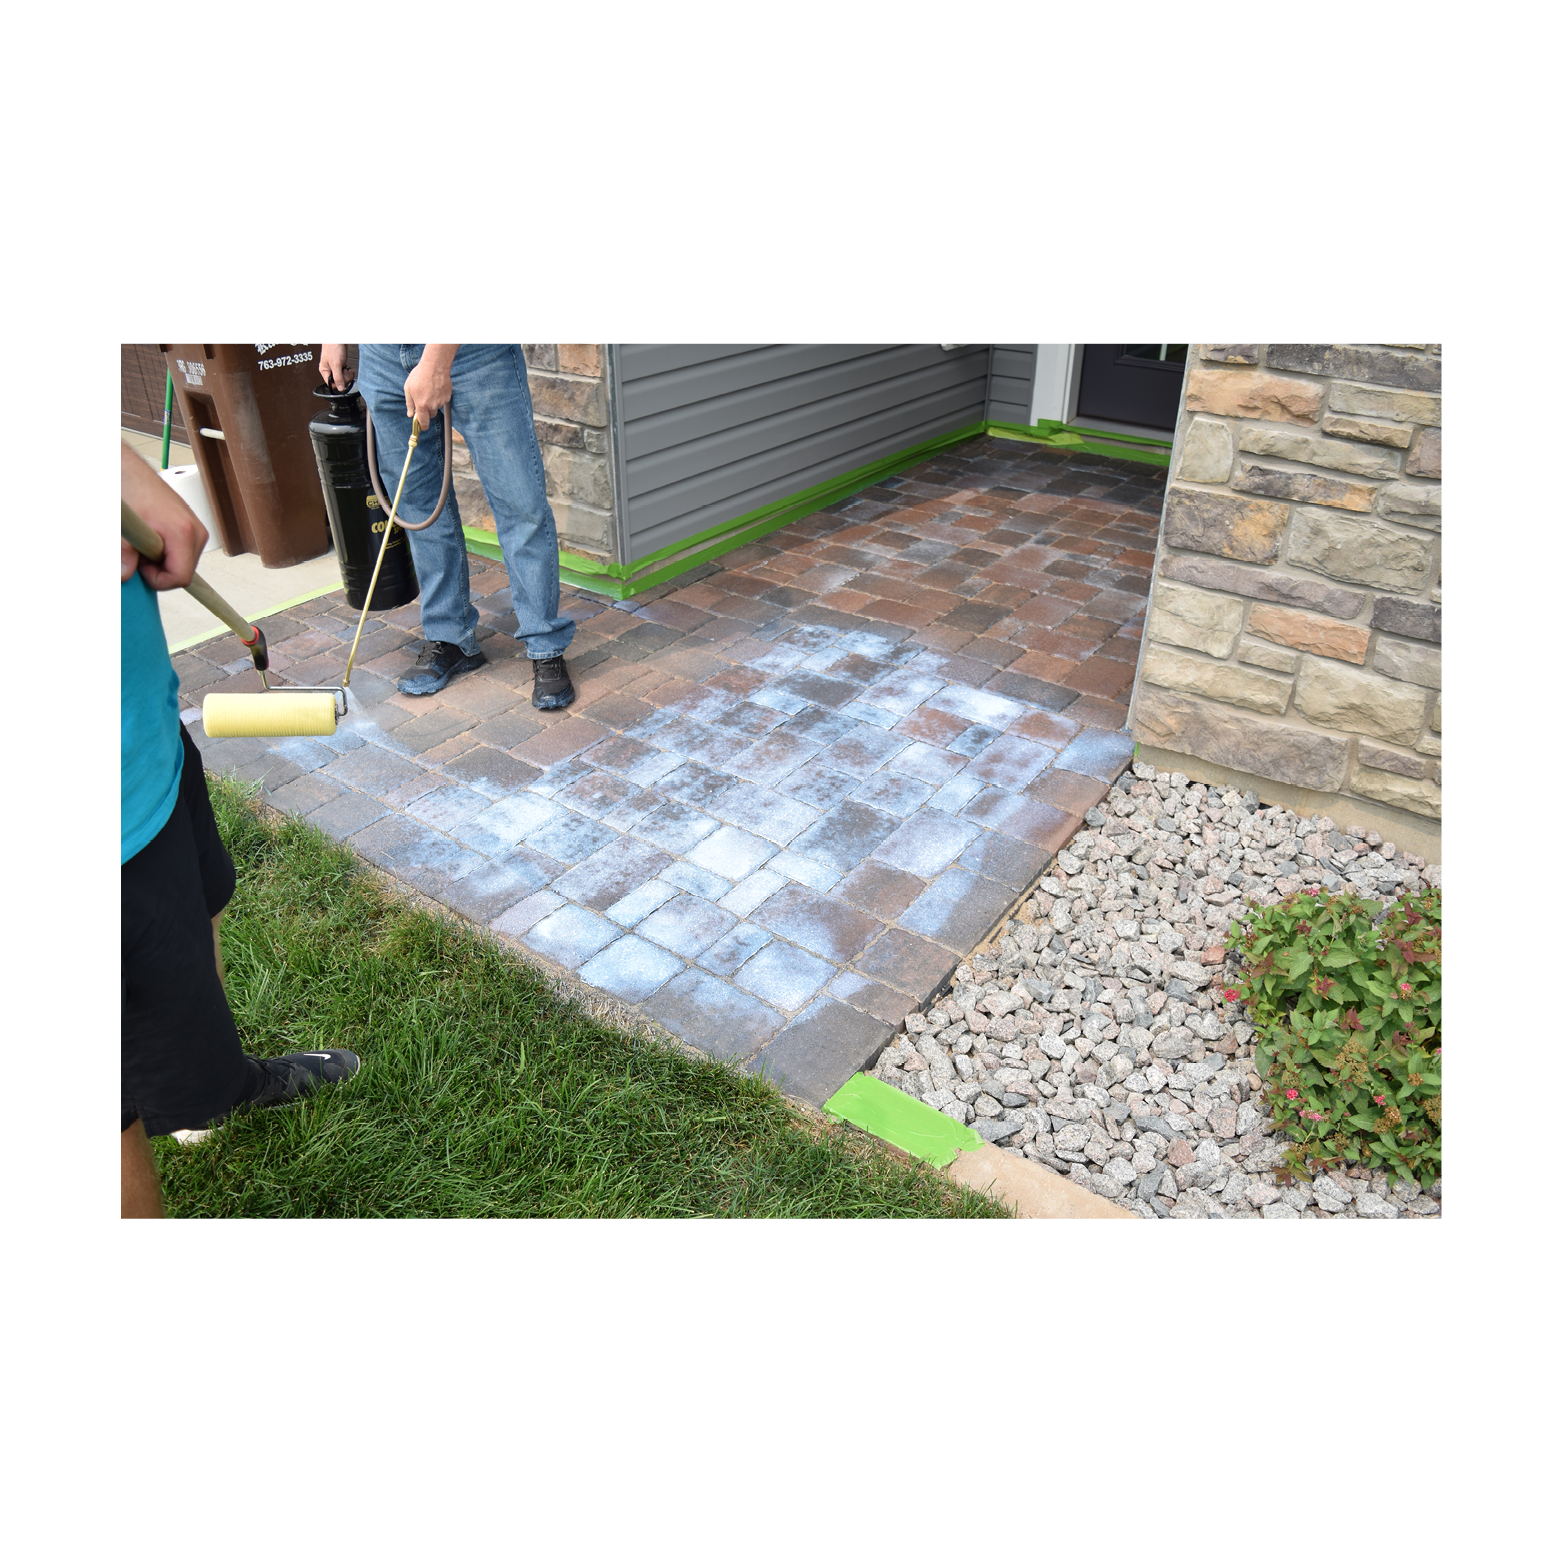 Applying low gloss paver sealer to entryway